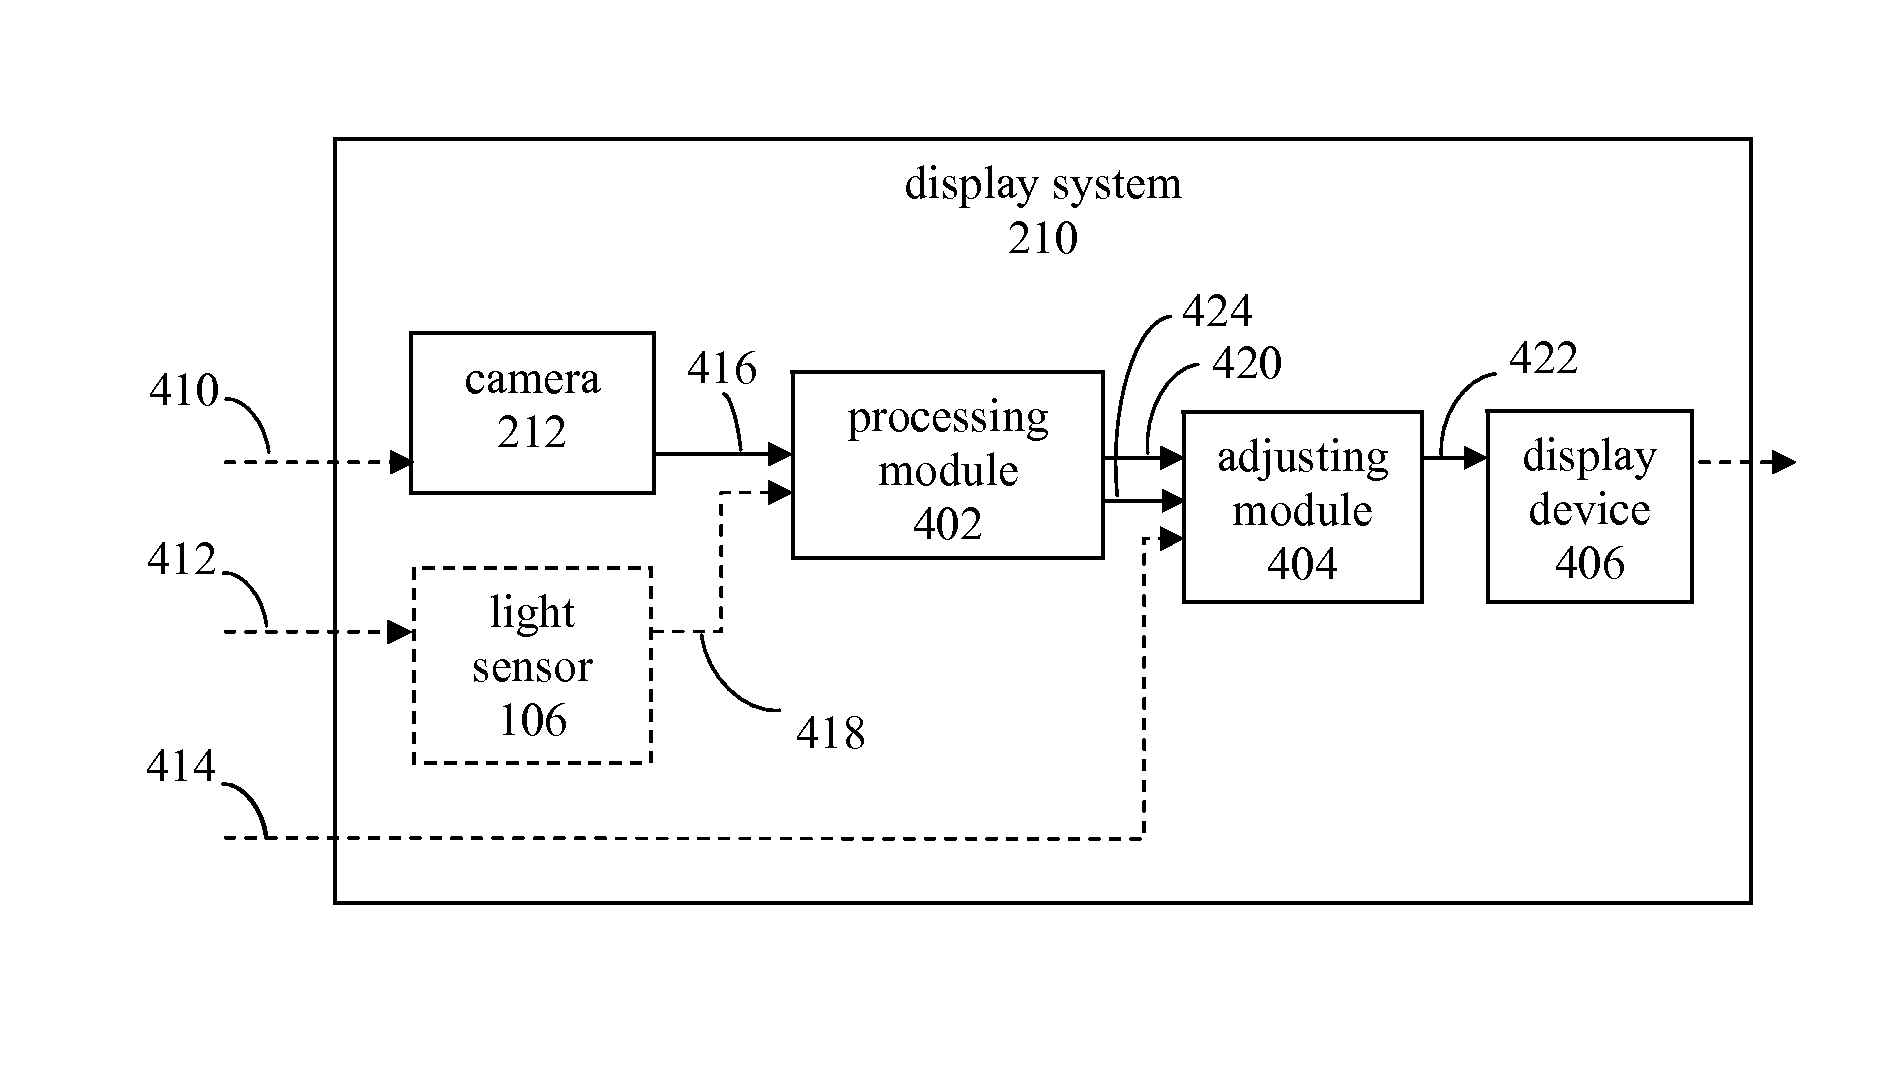 Automatic adjustment of display systems based on light at viewer position